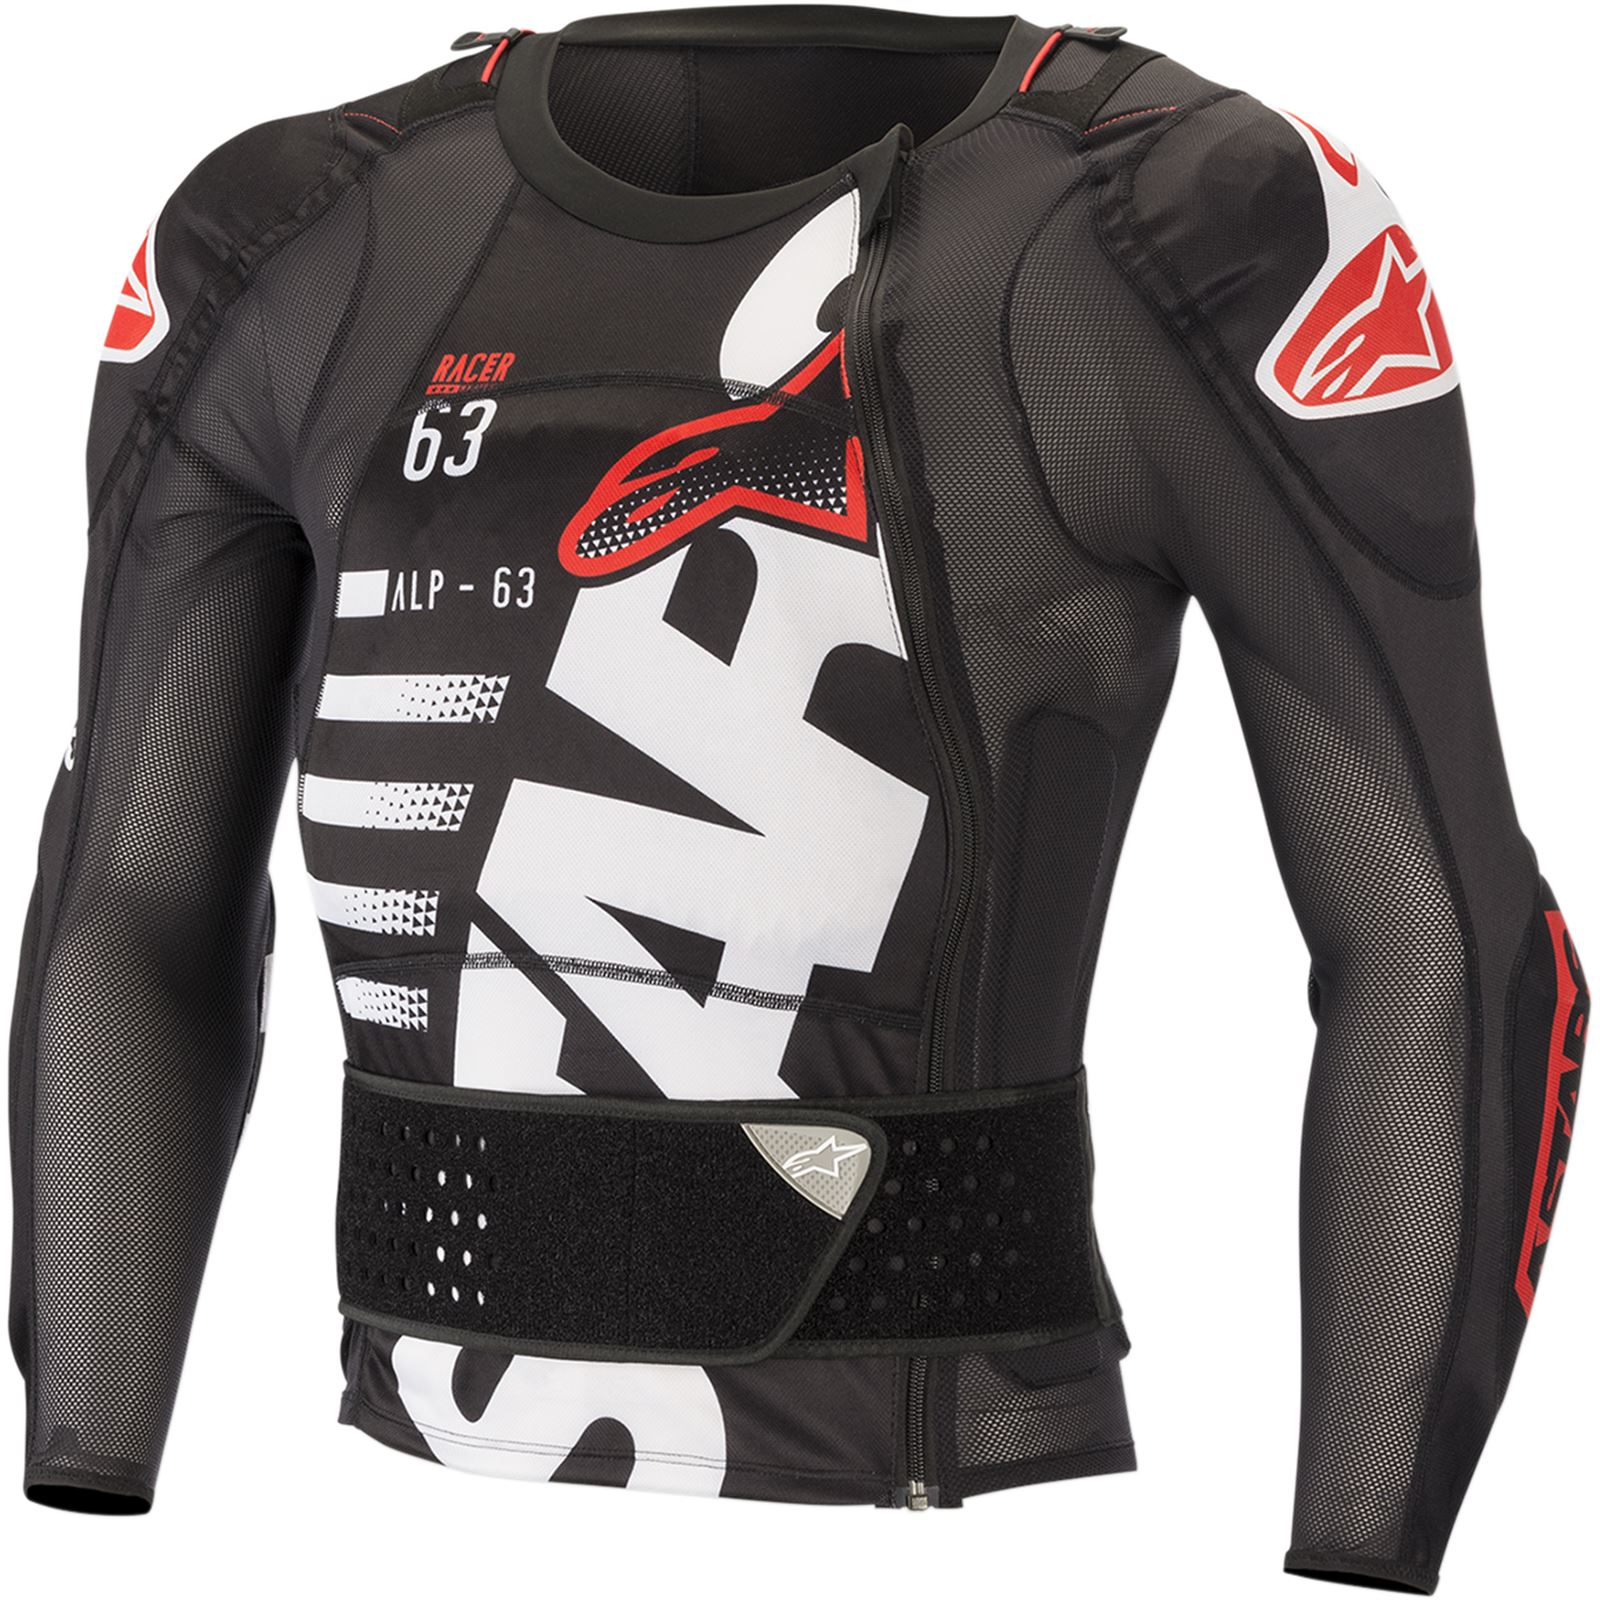 Alpinestars Sequence Protection Jacket - Long Sleeve - Black/White/Red - Small